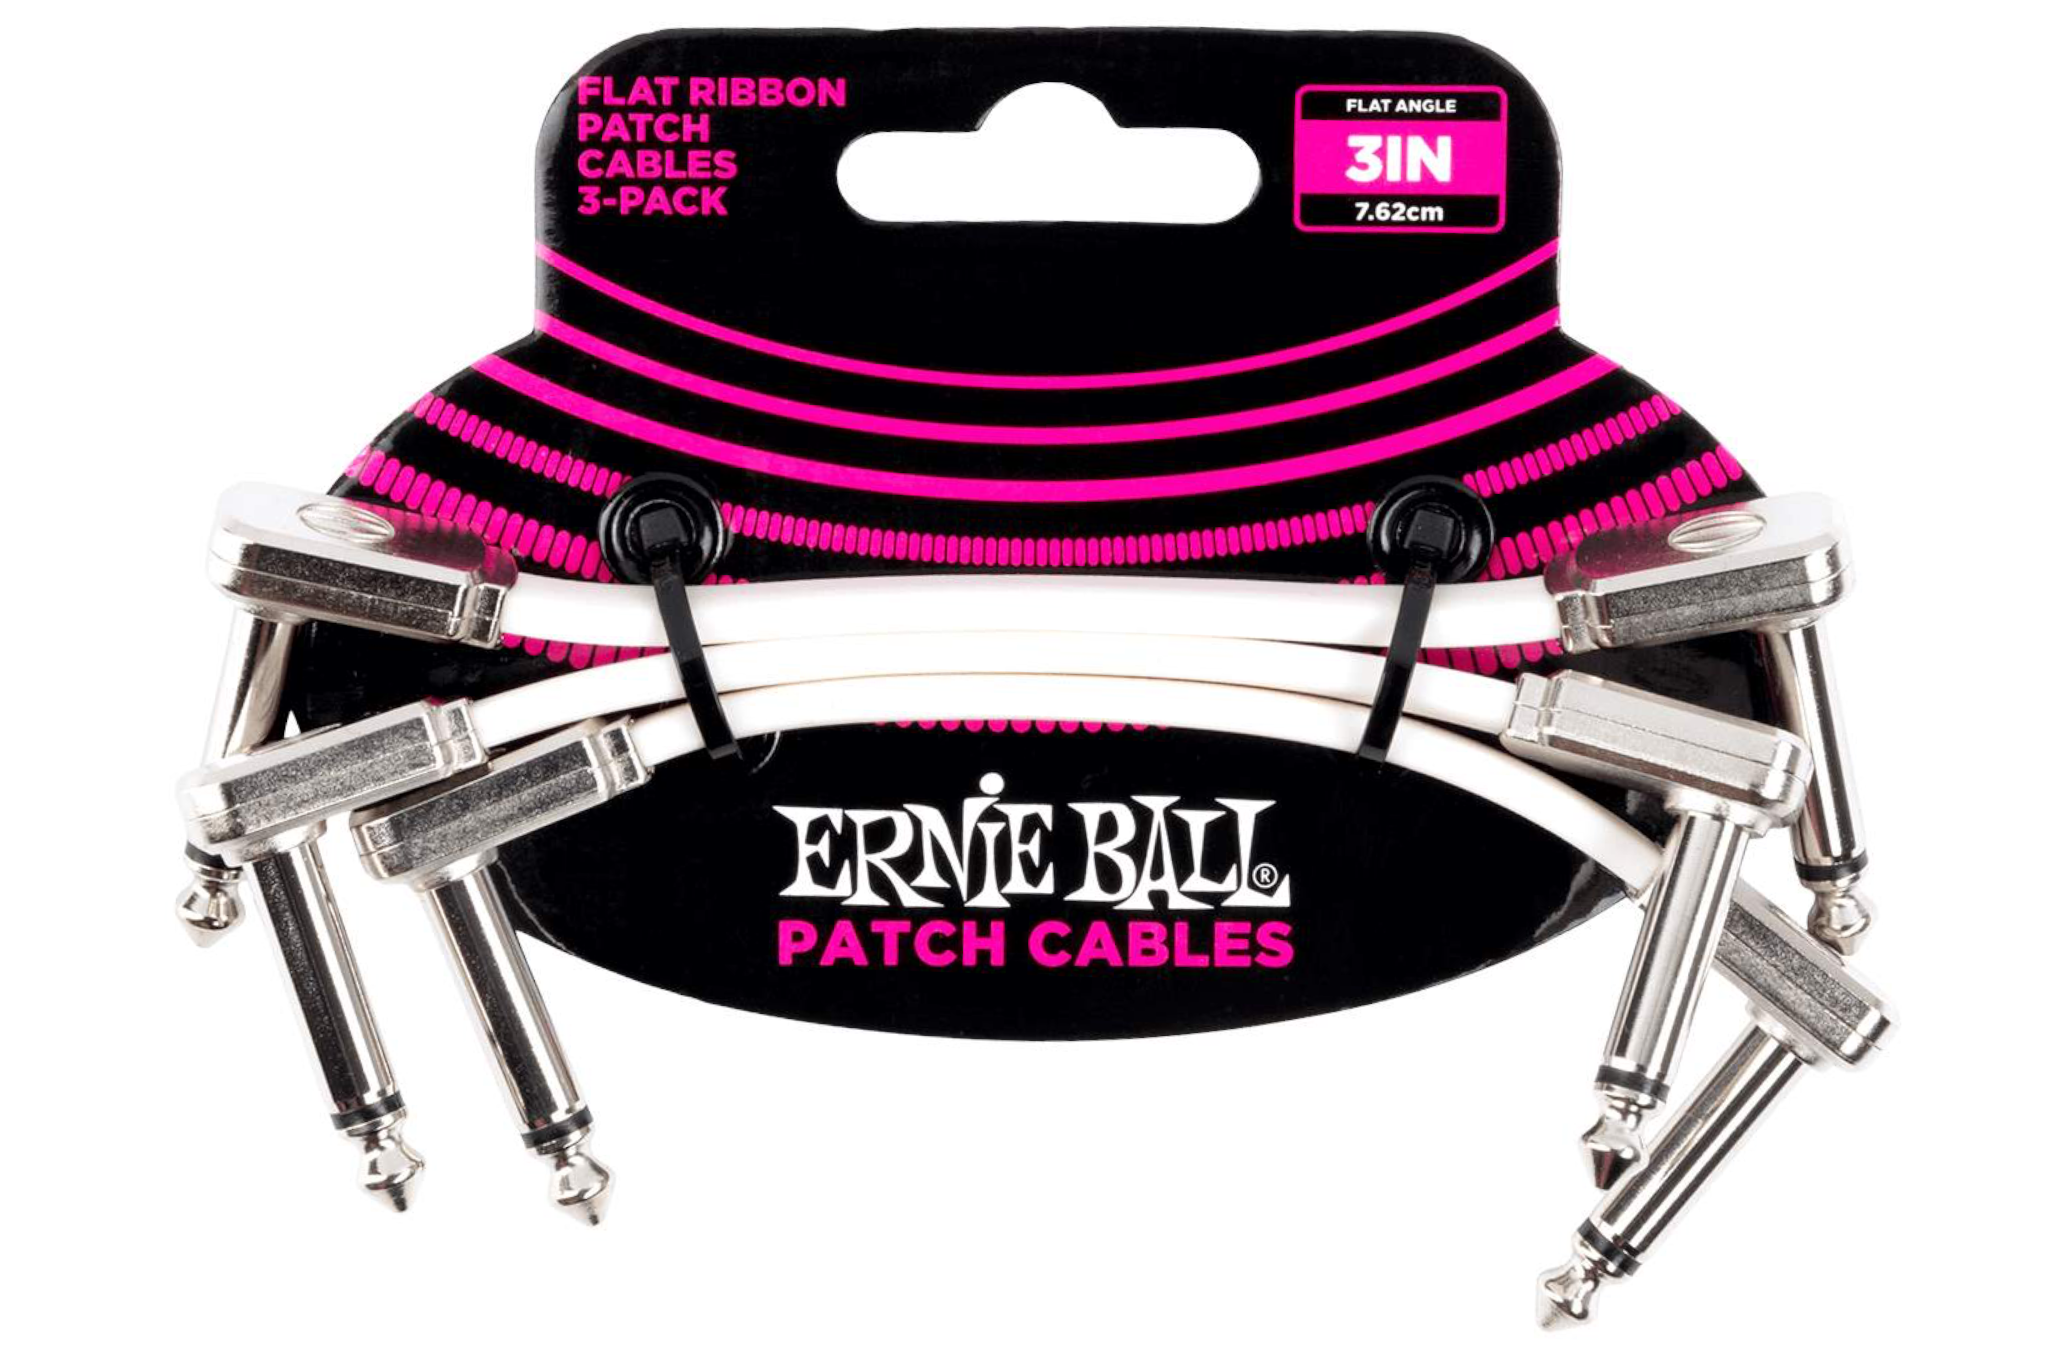 Ernie Ball 3" Flat Ribbon Patch Cable White 3 Pack - WHITE